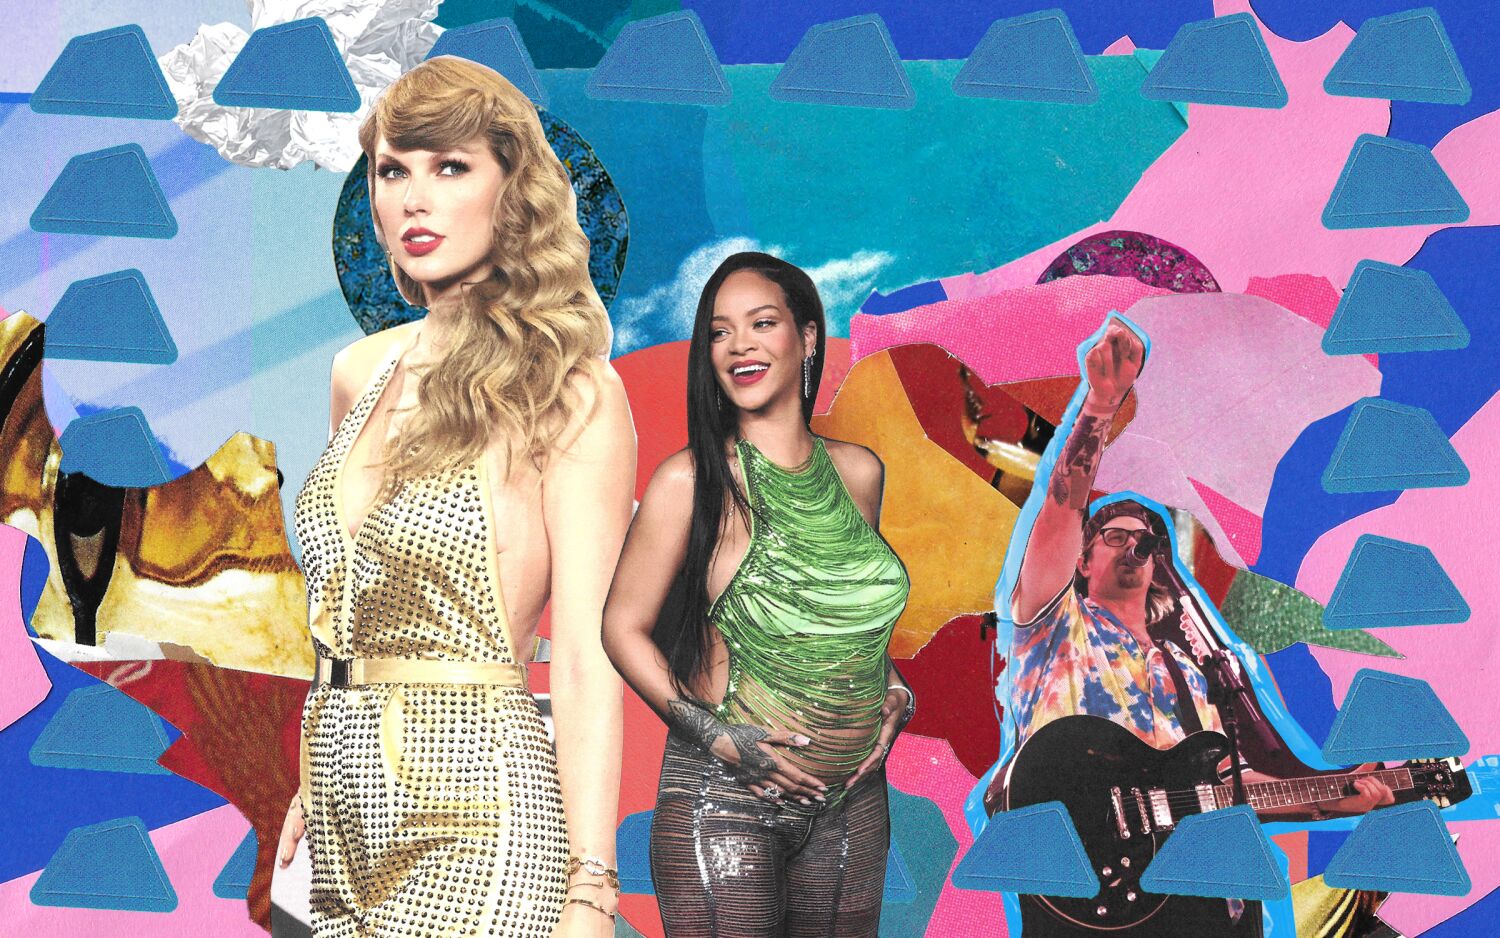 The 23 concerts and albums we're most excited for in 2023